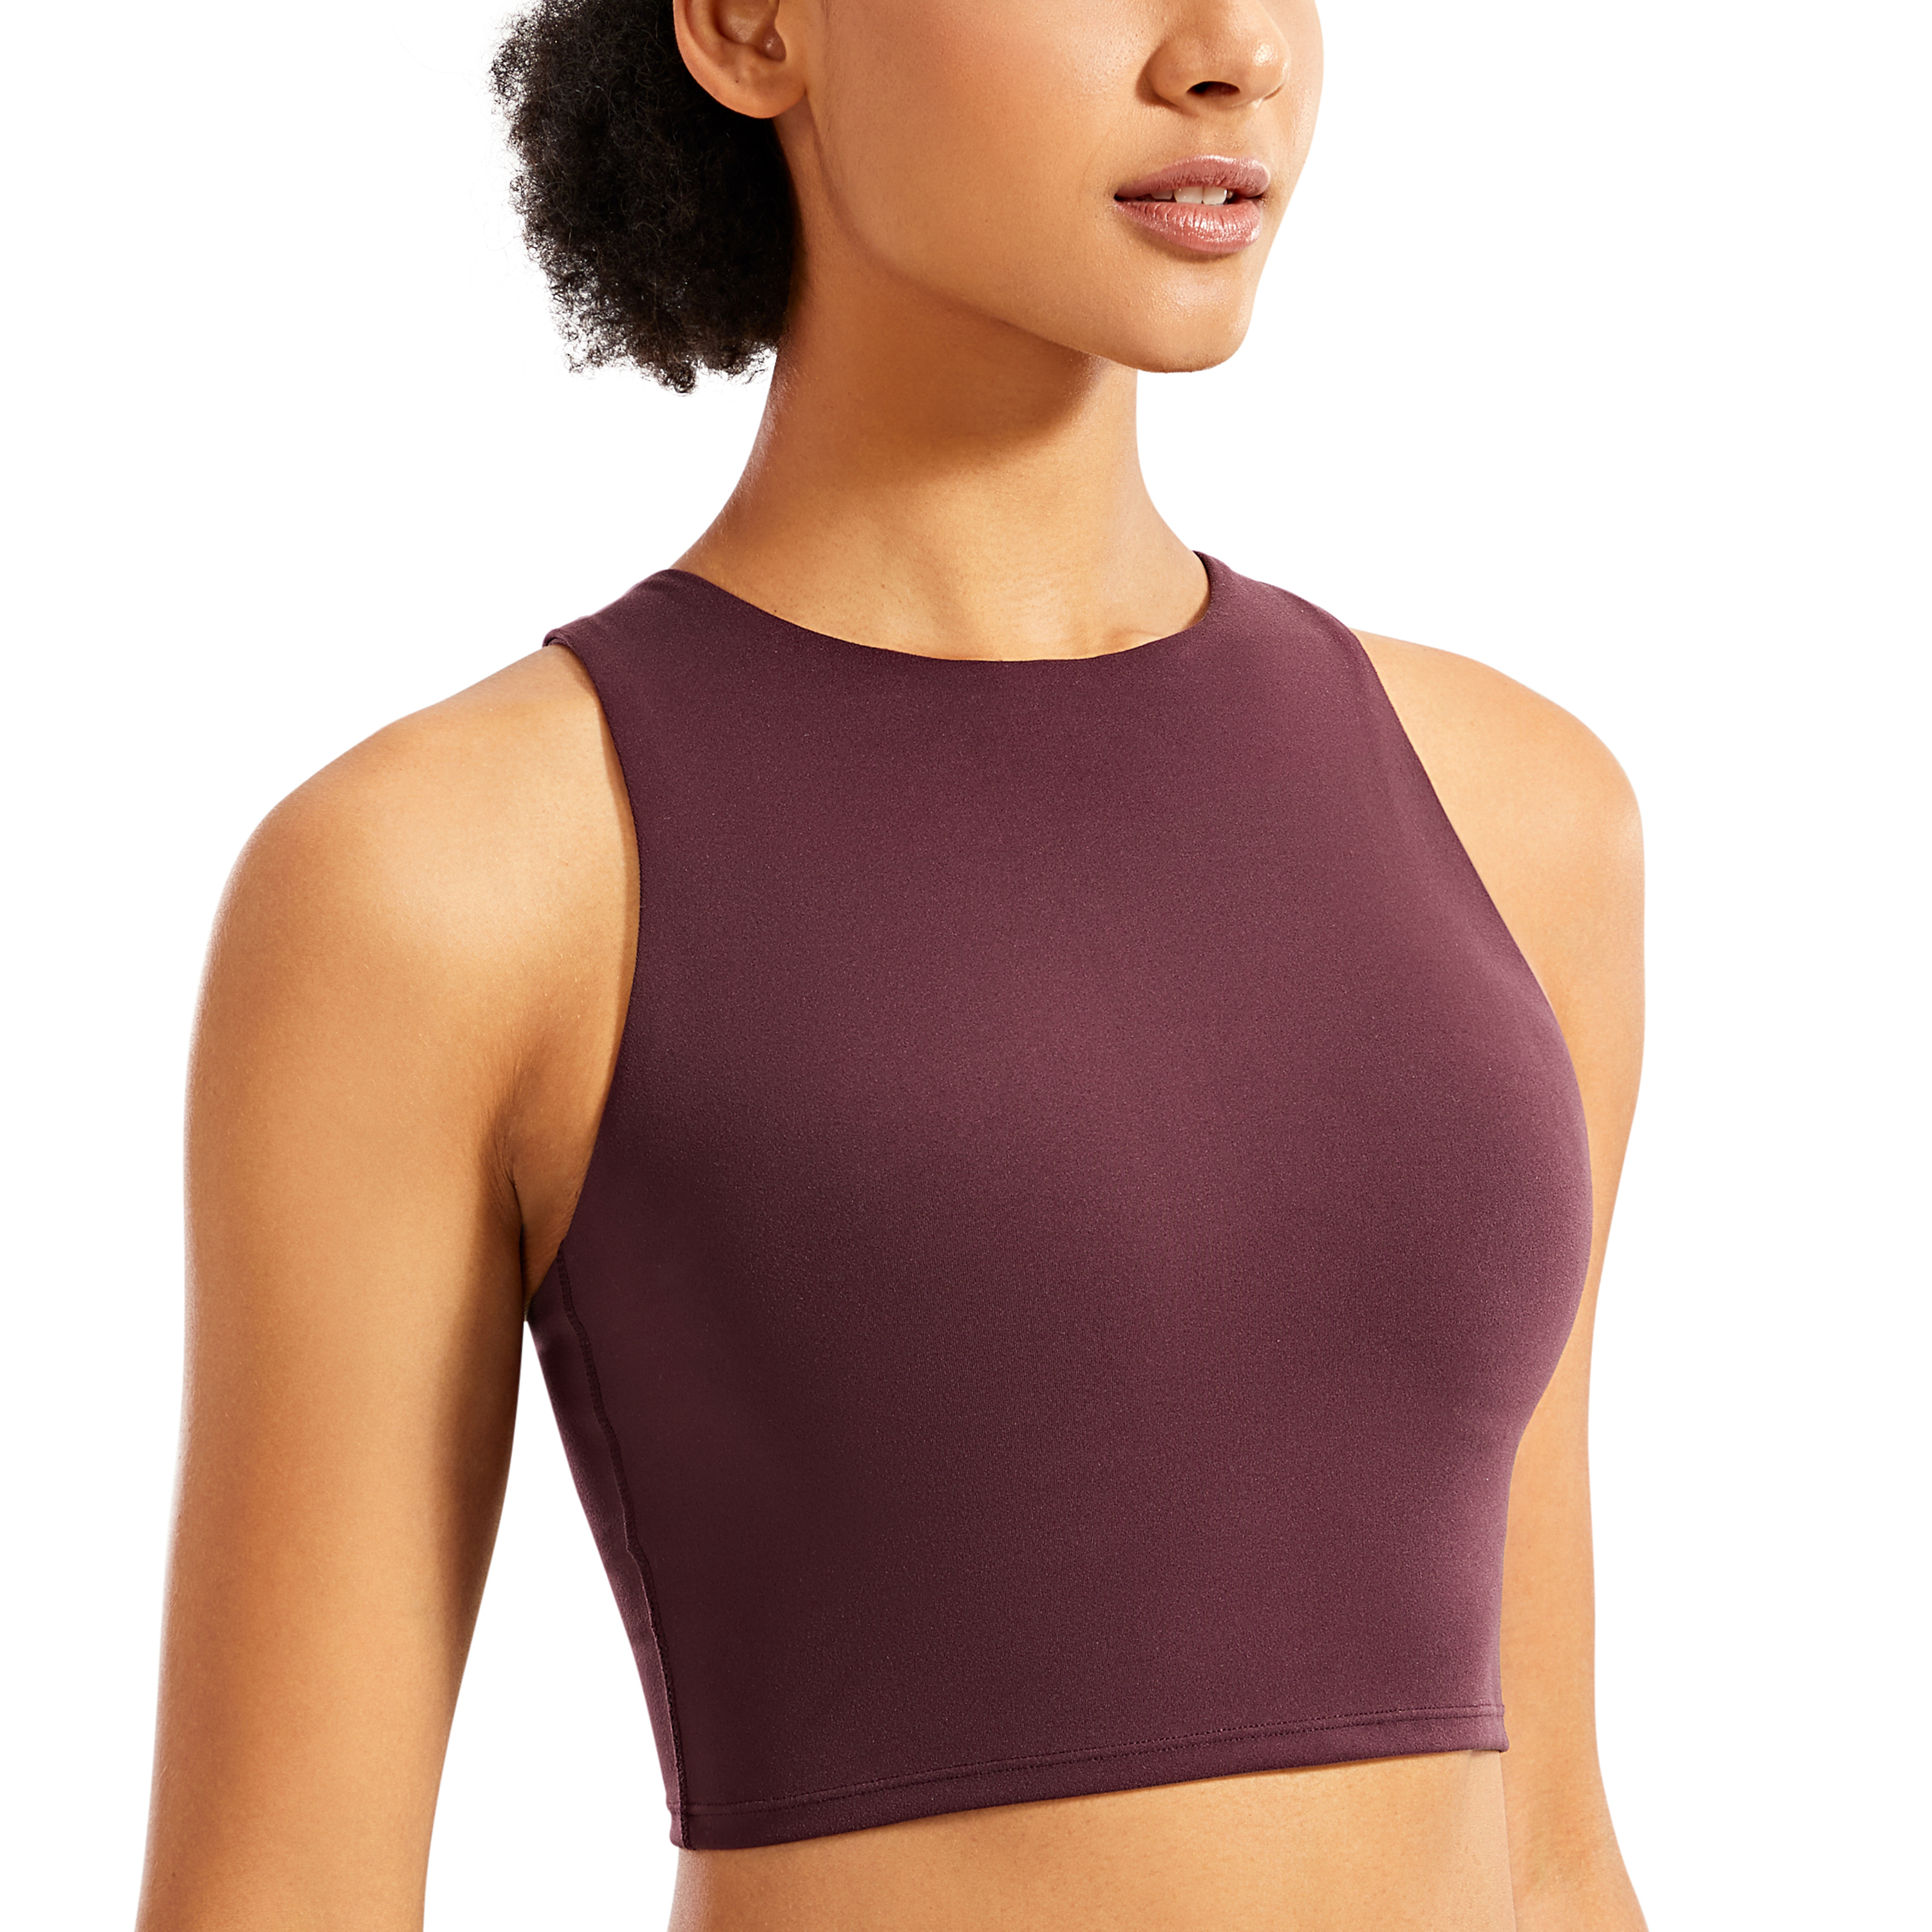 High Neck Longline Sports Bras for Women Workout Bras Crop Top for